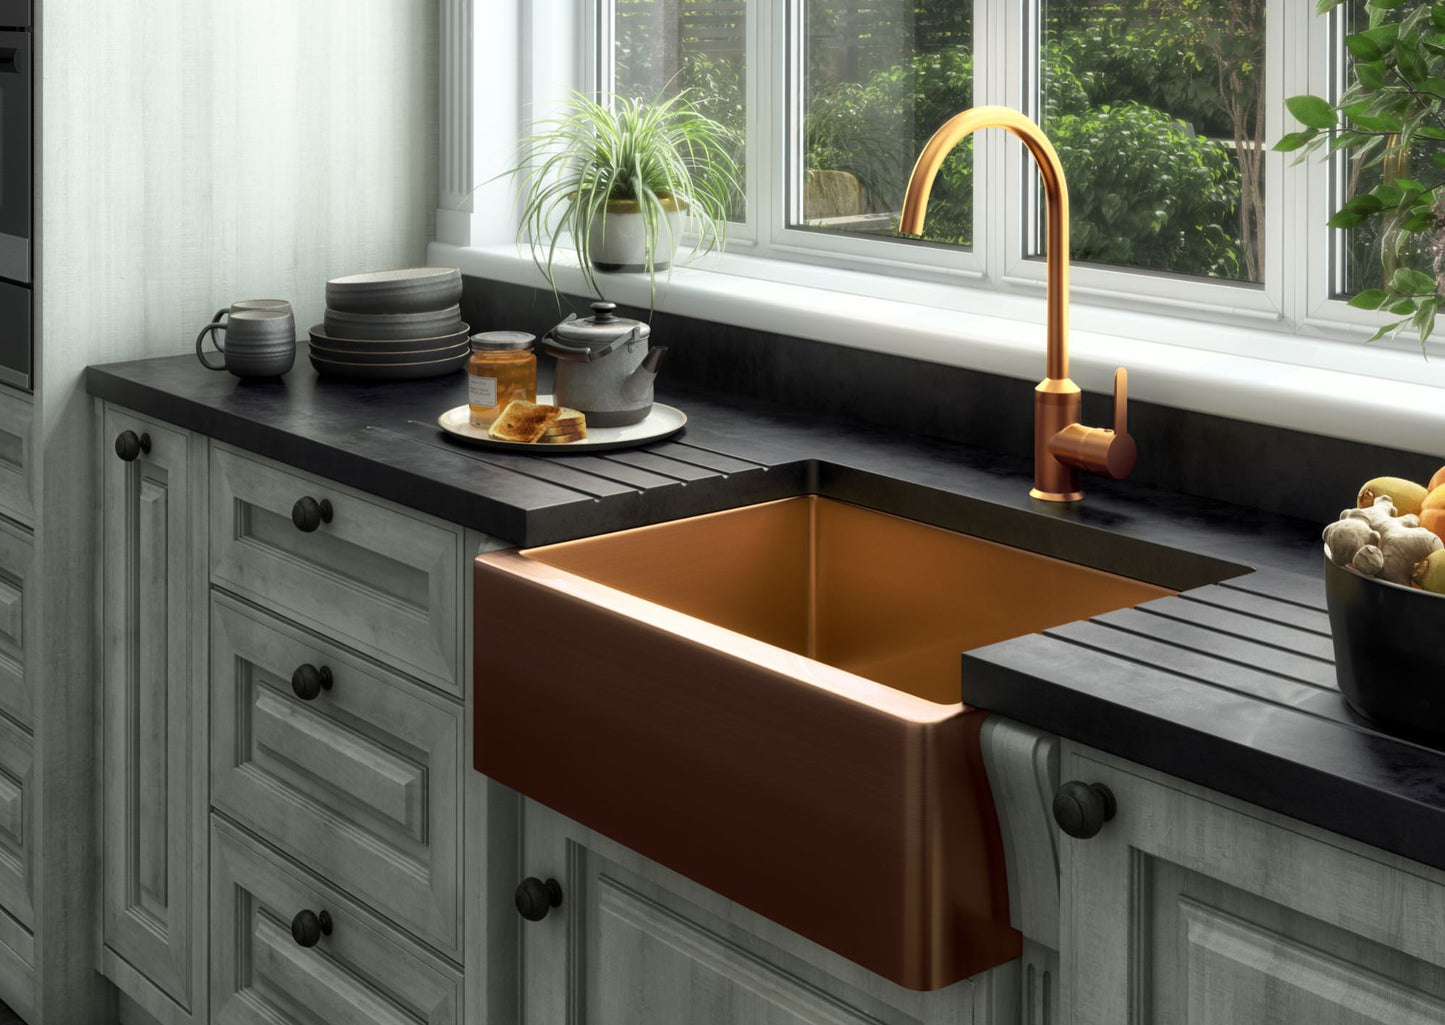 Hiranga Stainless Steel Belfast Sink - 2 Colours available